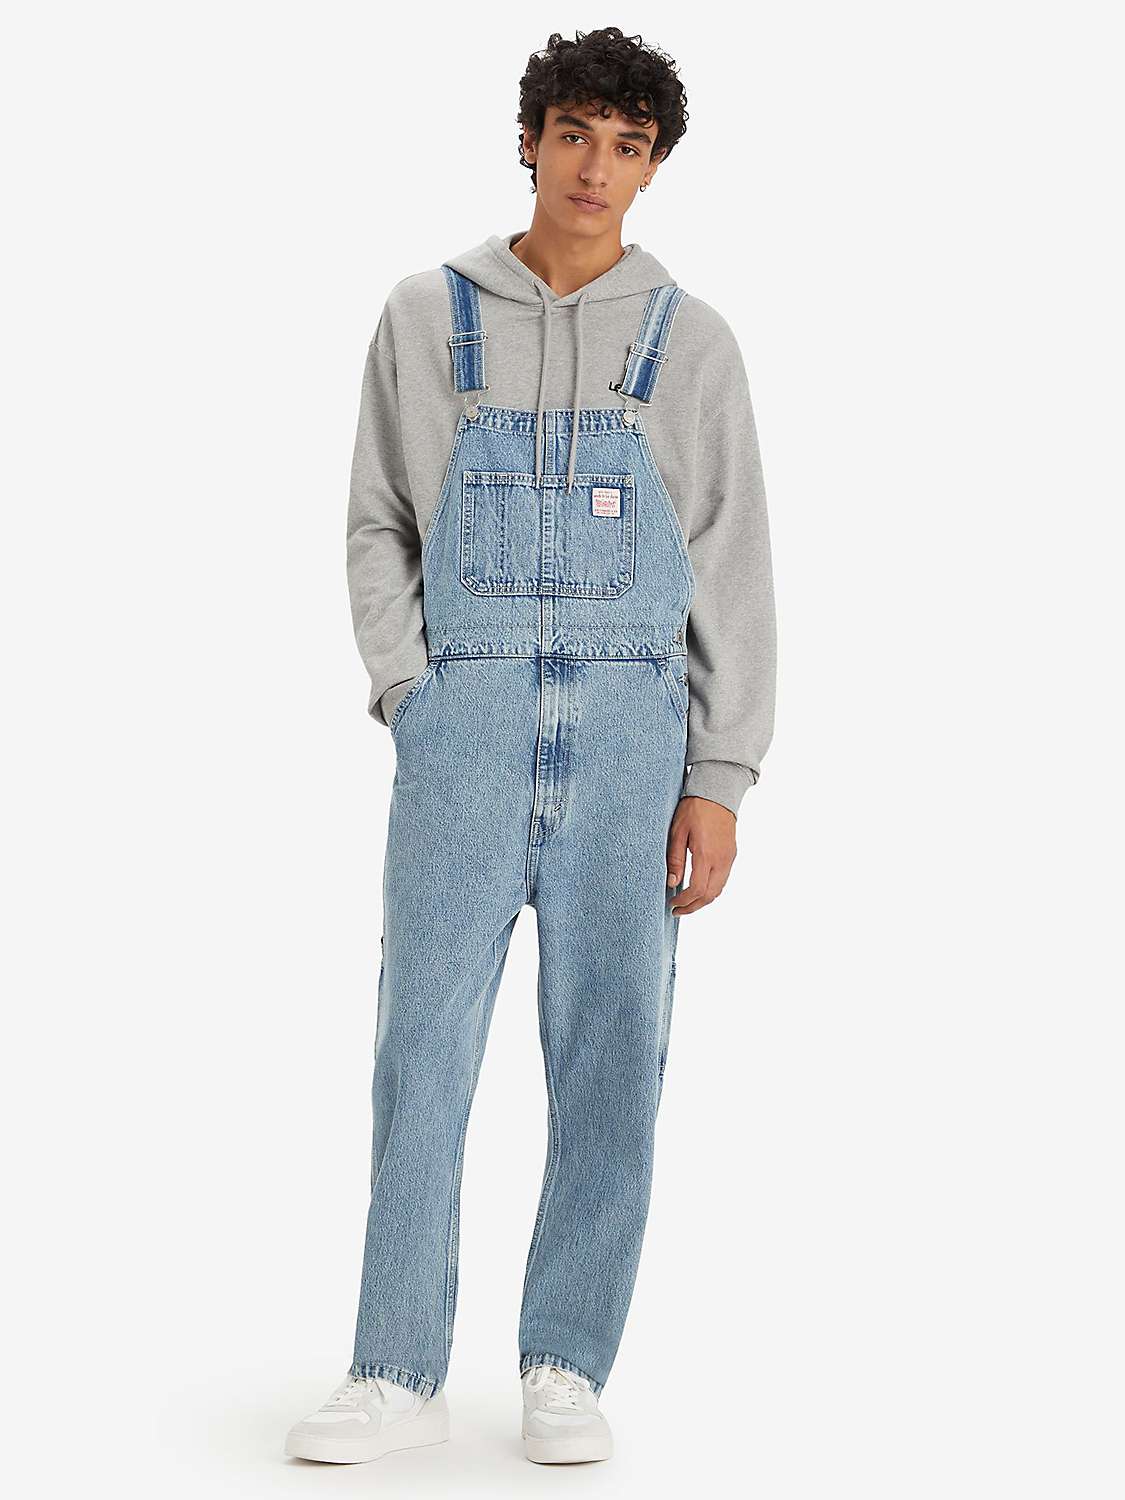 Buy Levi's Red Tab Overalls, Blue Online at johnlewis.com